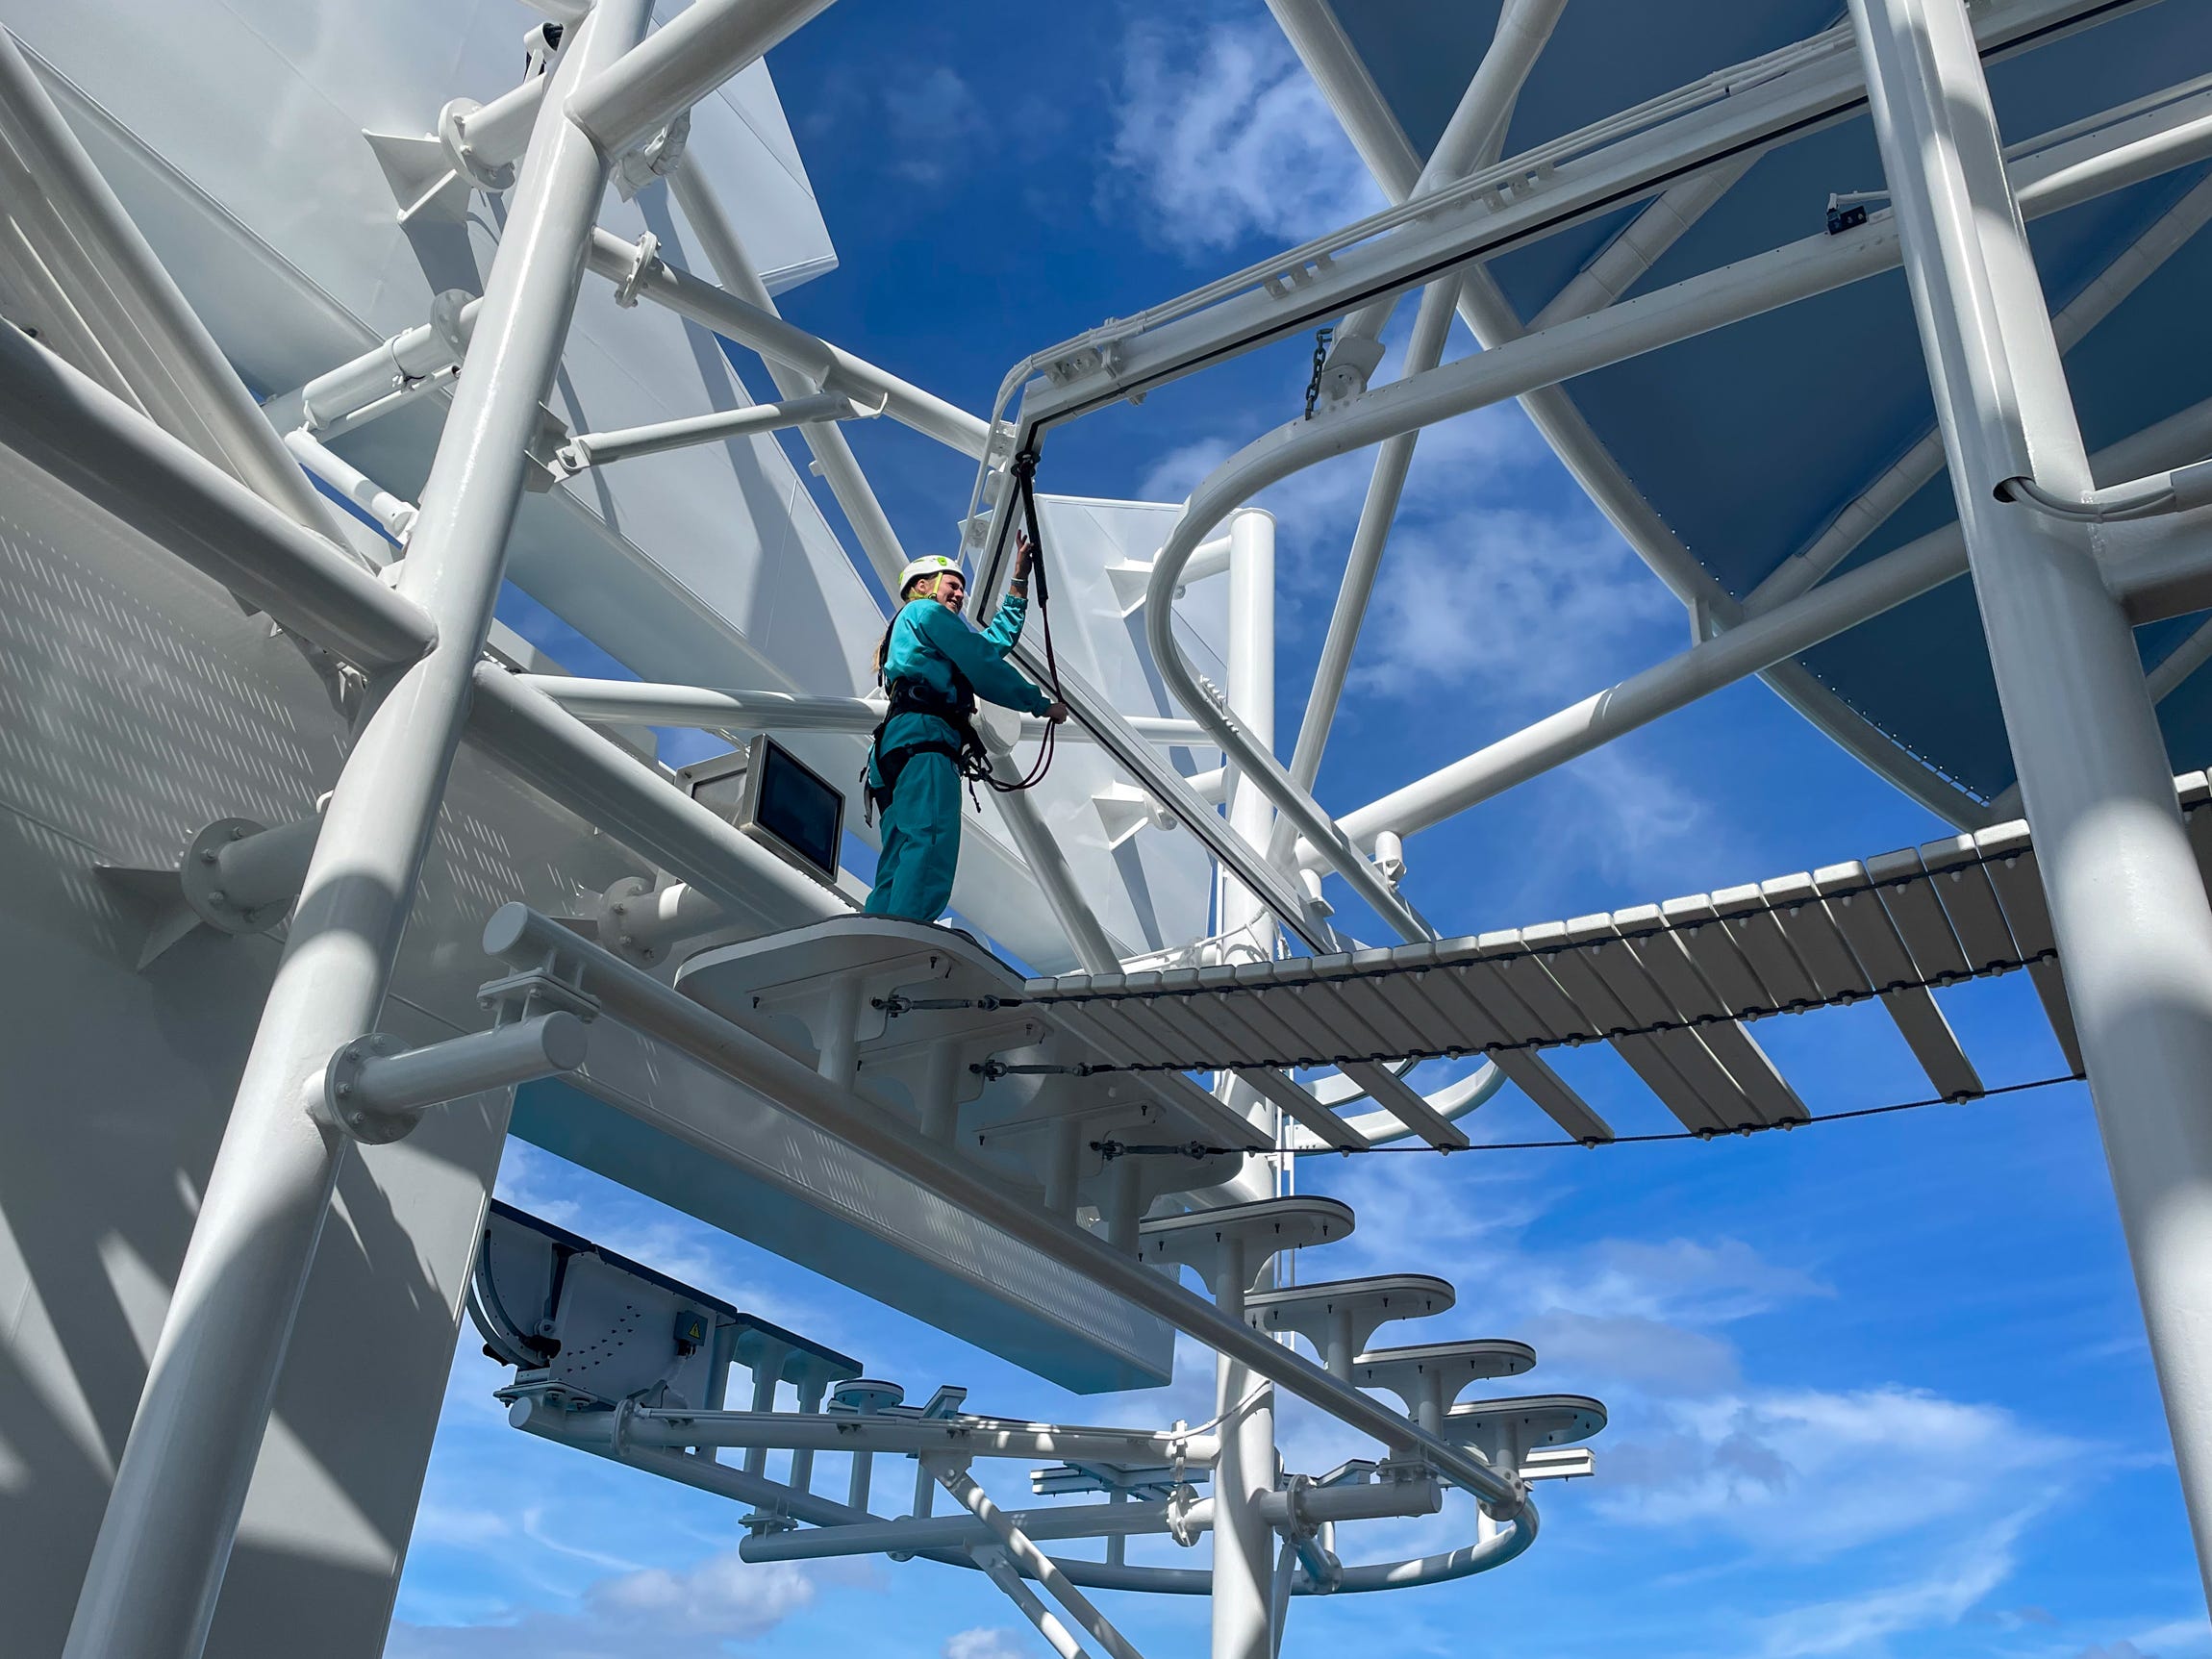 <p>While there, guests can step into a harness to traverse one of the ship's most adrenaline-pumping activities: Crown's Edge. Expect to dangle 154 feet above the ocean when the floor unexpectedly drops from under your feet.</p>